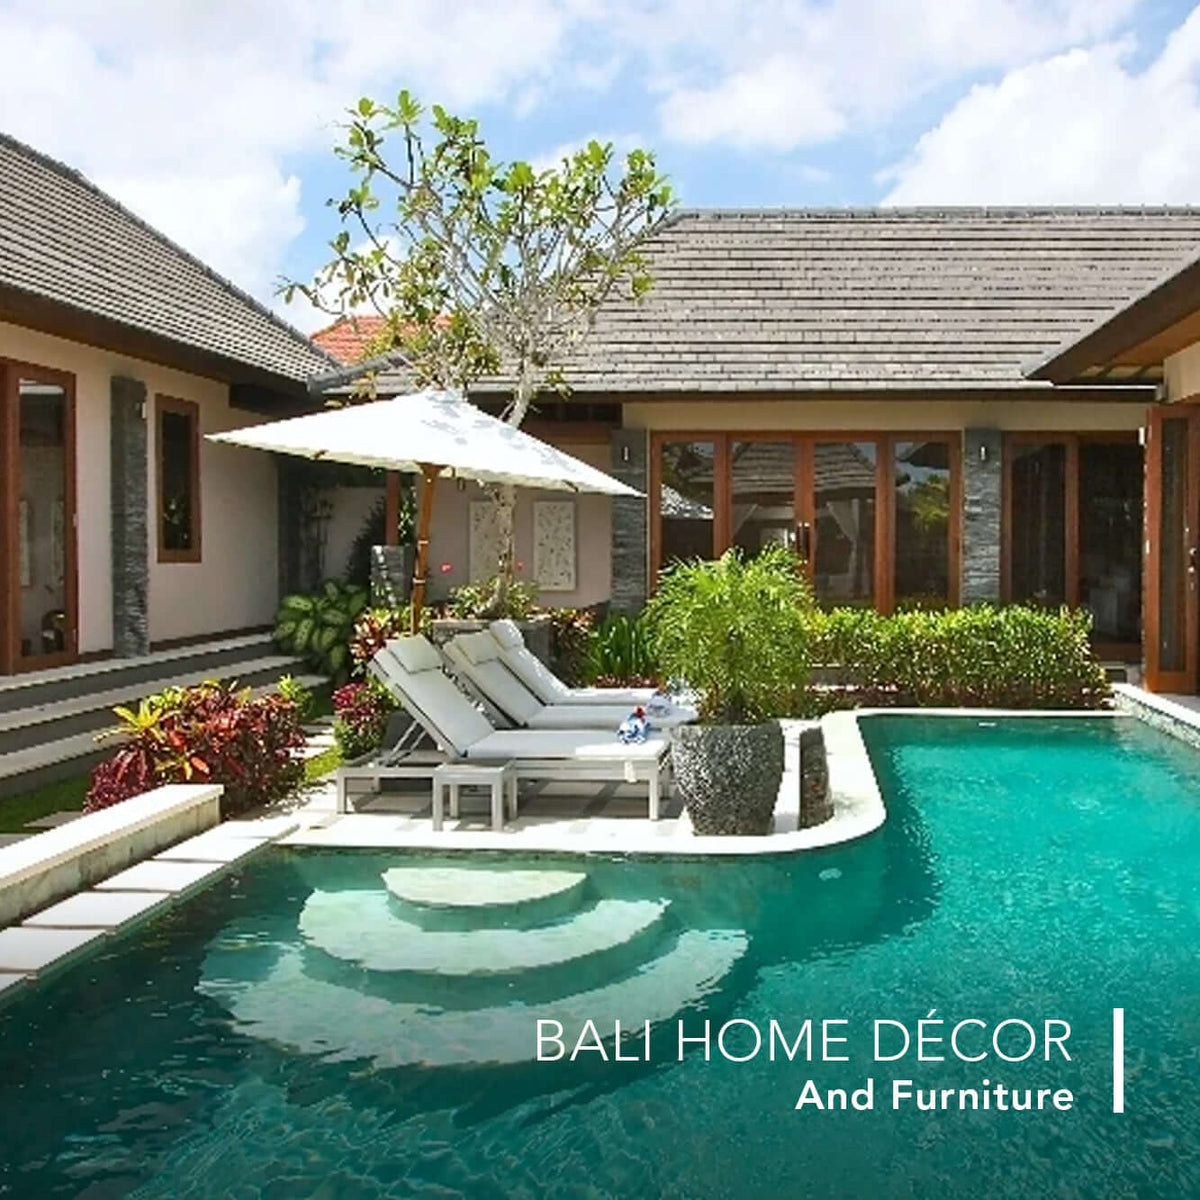 Bali Home Décor and Furniture